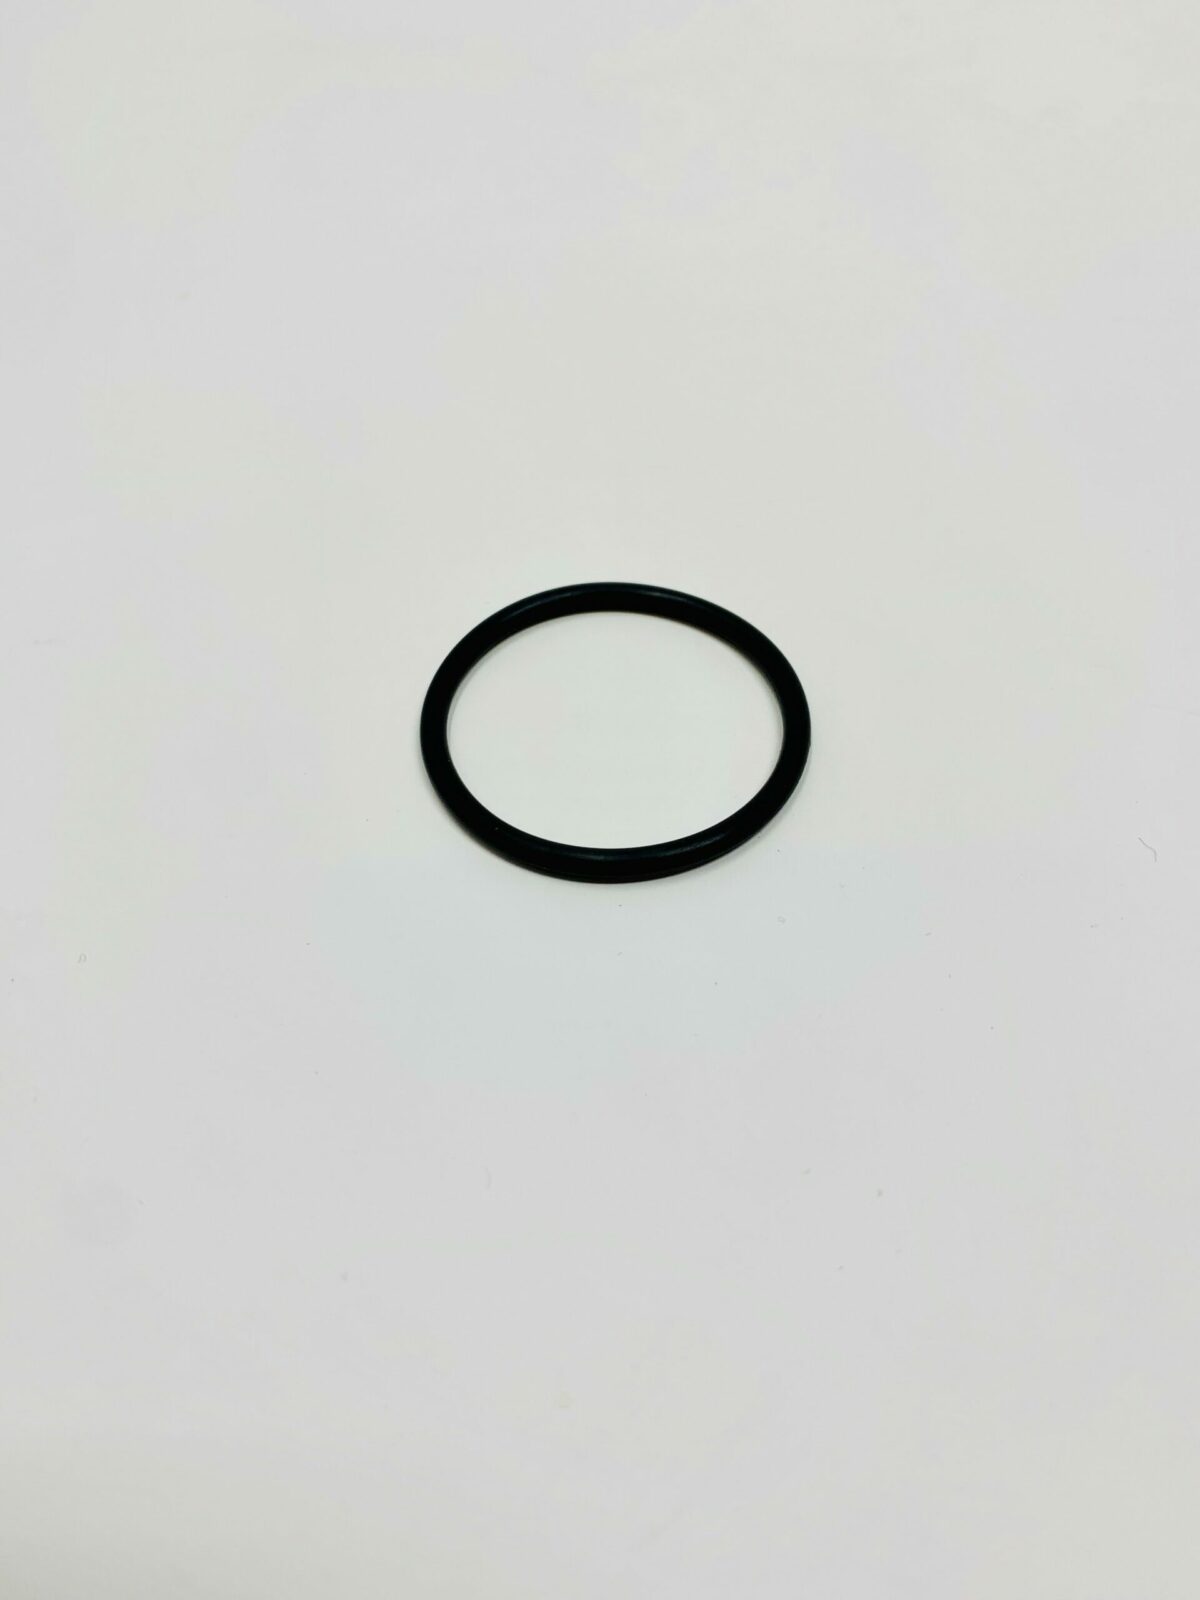 Exhaust to spacer "O" ring for Atom 80